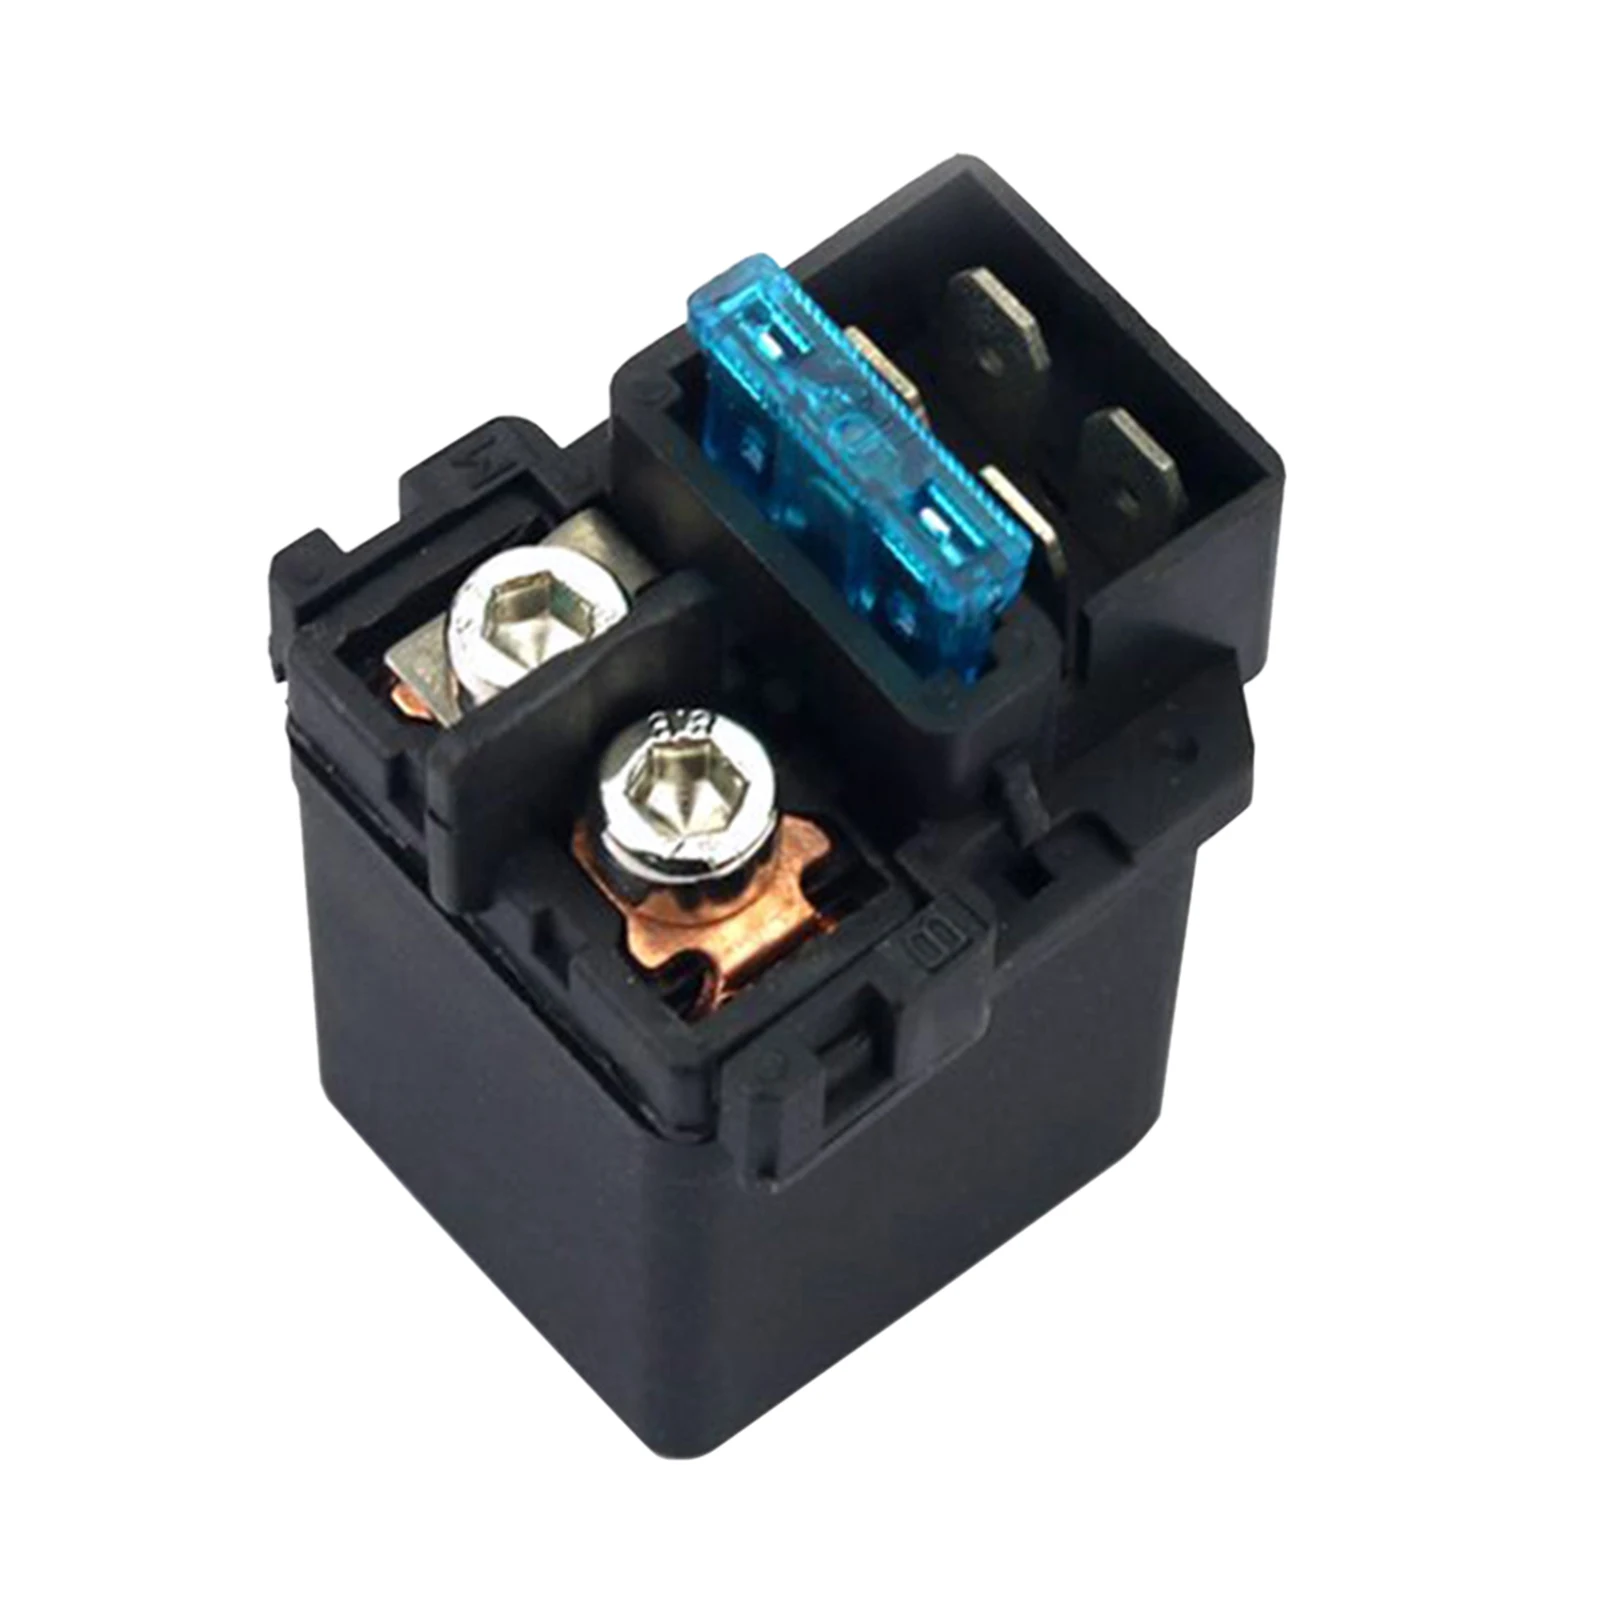 FZ16 Starter Relay Solenoid for Yamaha FZ 16 YS150 Electric Spare Parts